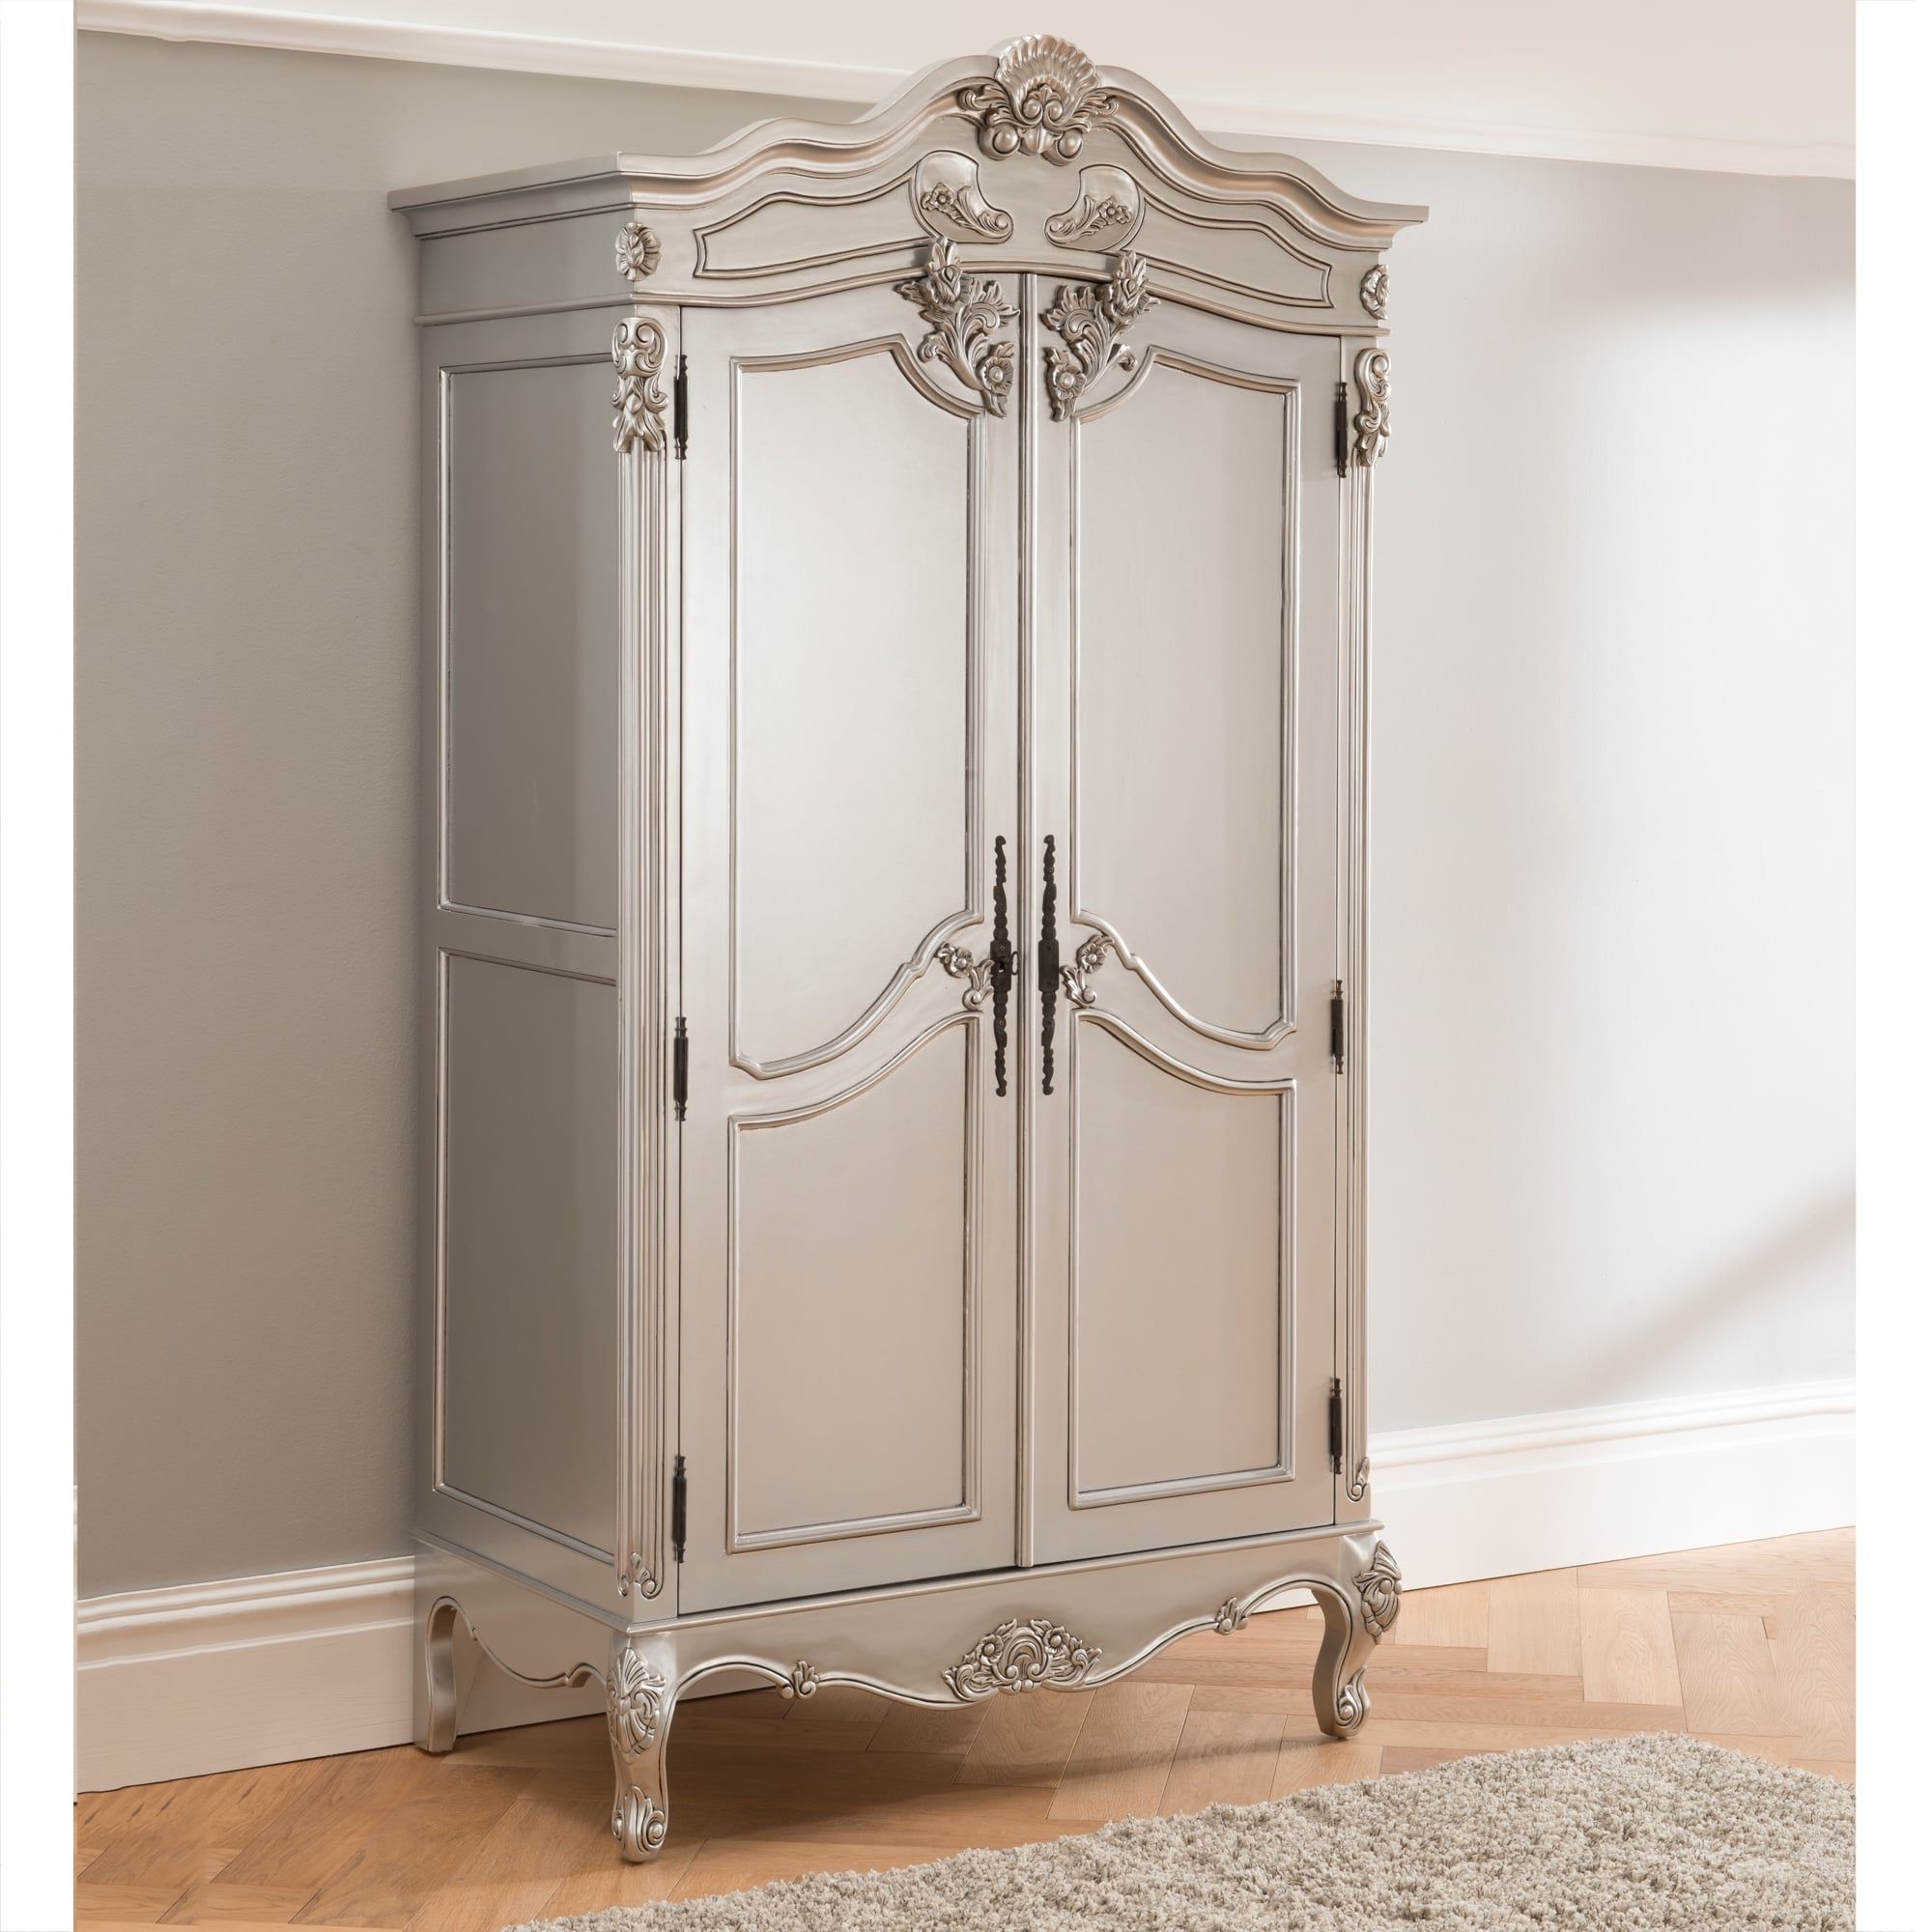 Baroque Antique French Wardrobe Works Exceptional Alongside Our Shabby Chic  Furniture Pertaining To Cheap French Style Wardrobes (Gallery 5 of 20)